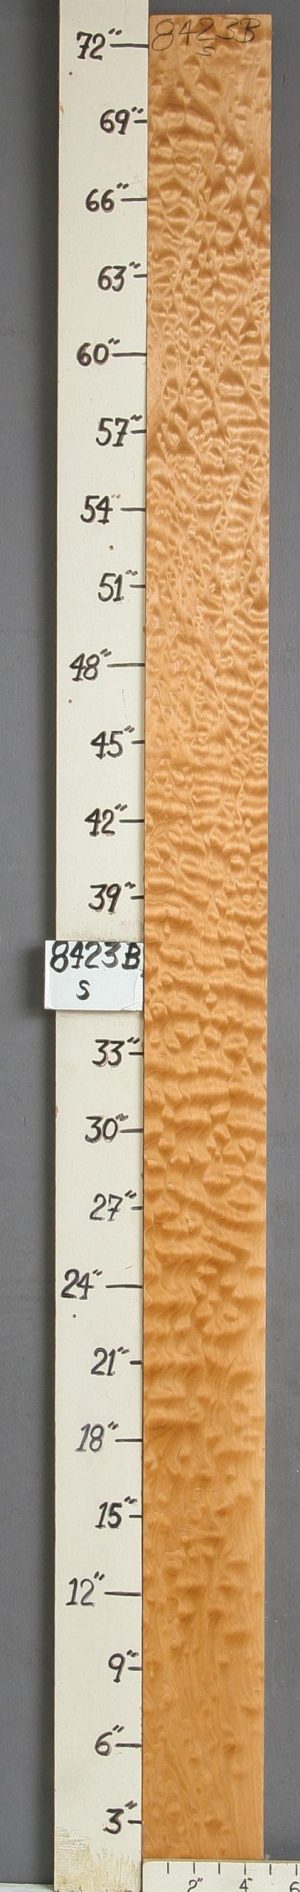 MUSICAL QUILTED MAPLE LUMBER 4"5/8 X 73" X 4/4 (NWT-8423B)